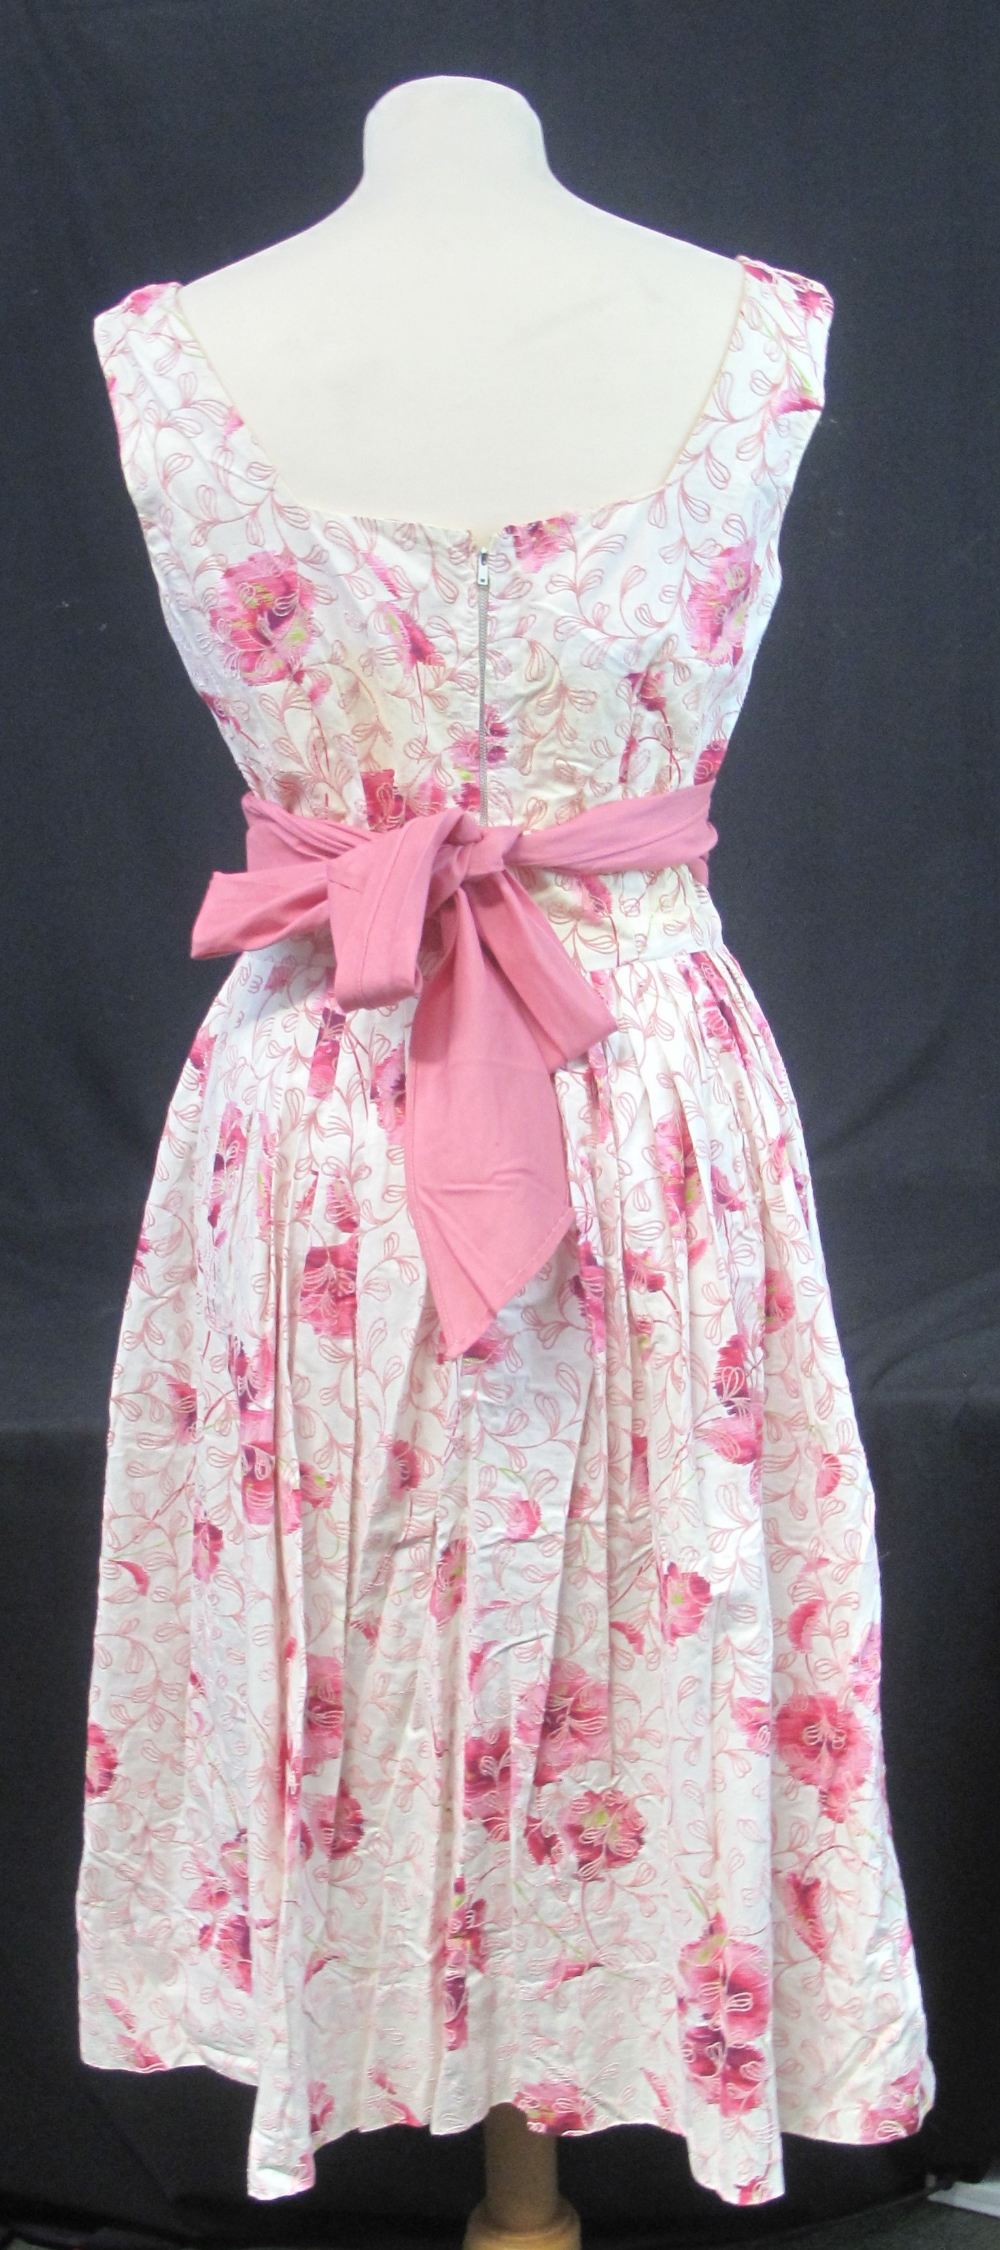 Five cotton 1950's summer dresses to include: lilac belted dress with lace insert, - Image 5 of 8